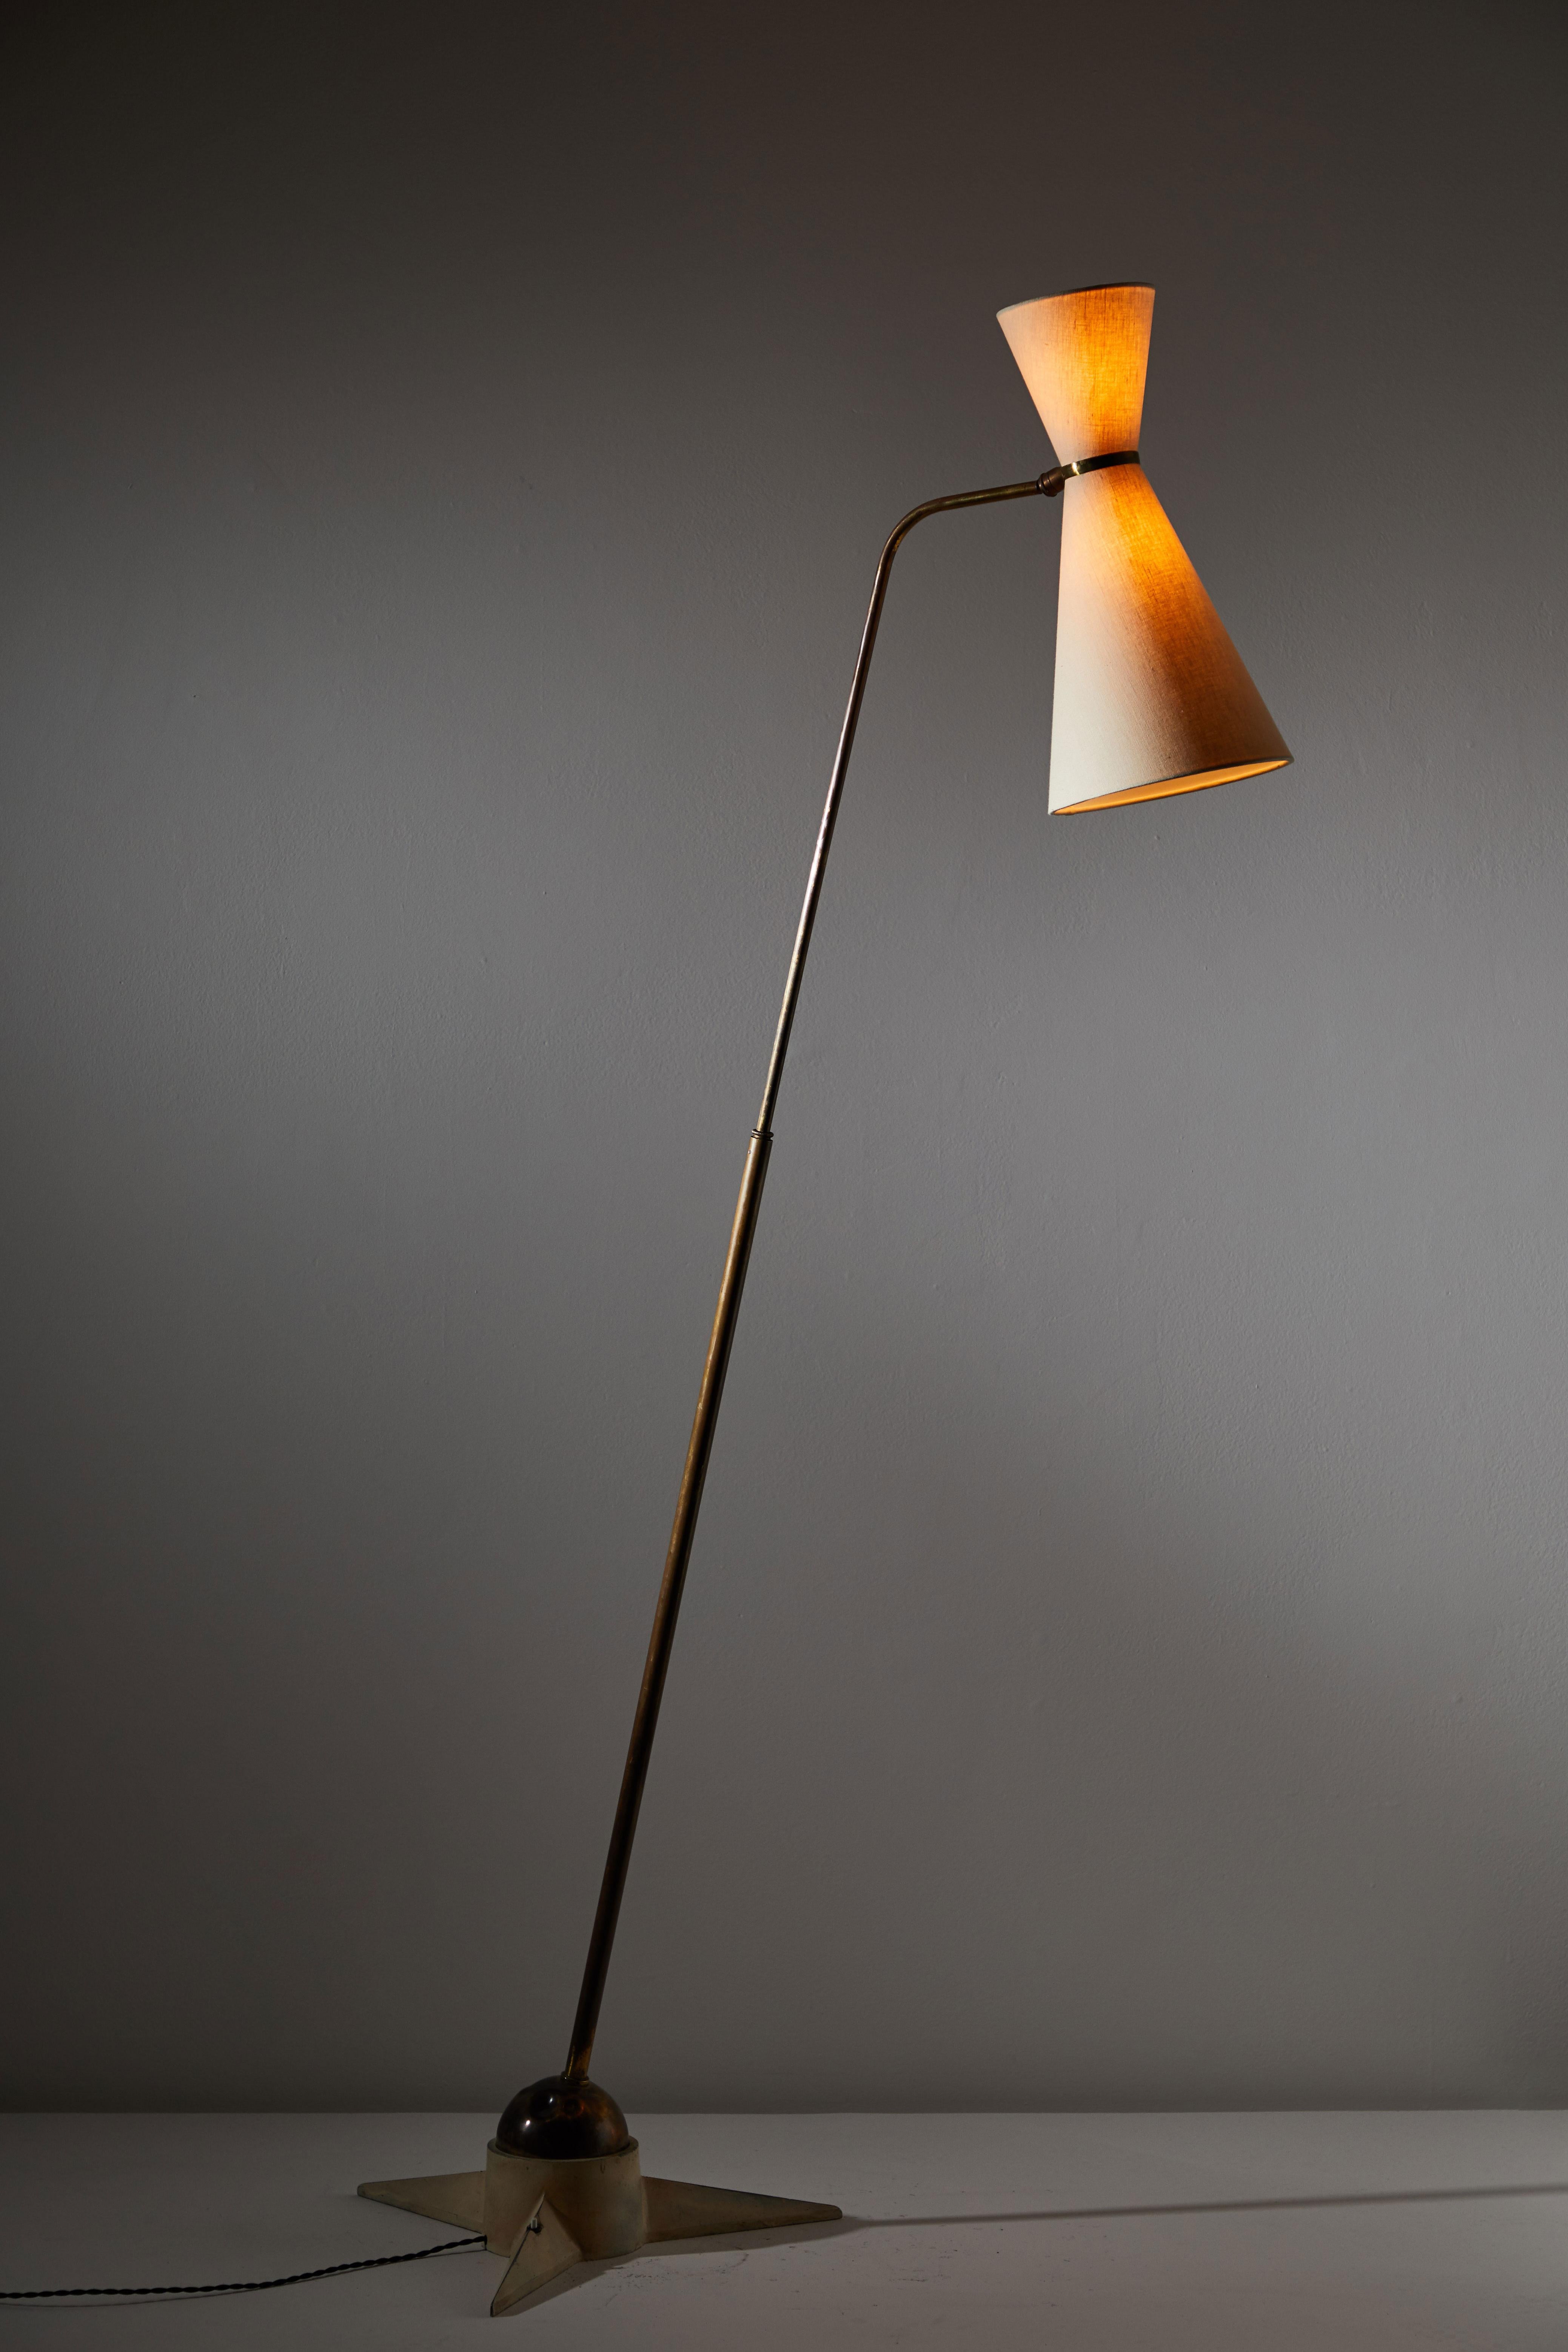 Floor lamp designed by Robert Mathieu in France, 1955. Enameled metal and brass. Adjustable custom linen shade. Adjustable height by way of pivoting brass ball. Rewired with black french twist cord. Takes one E27 75 w maximum bulb.